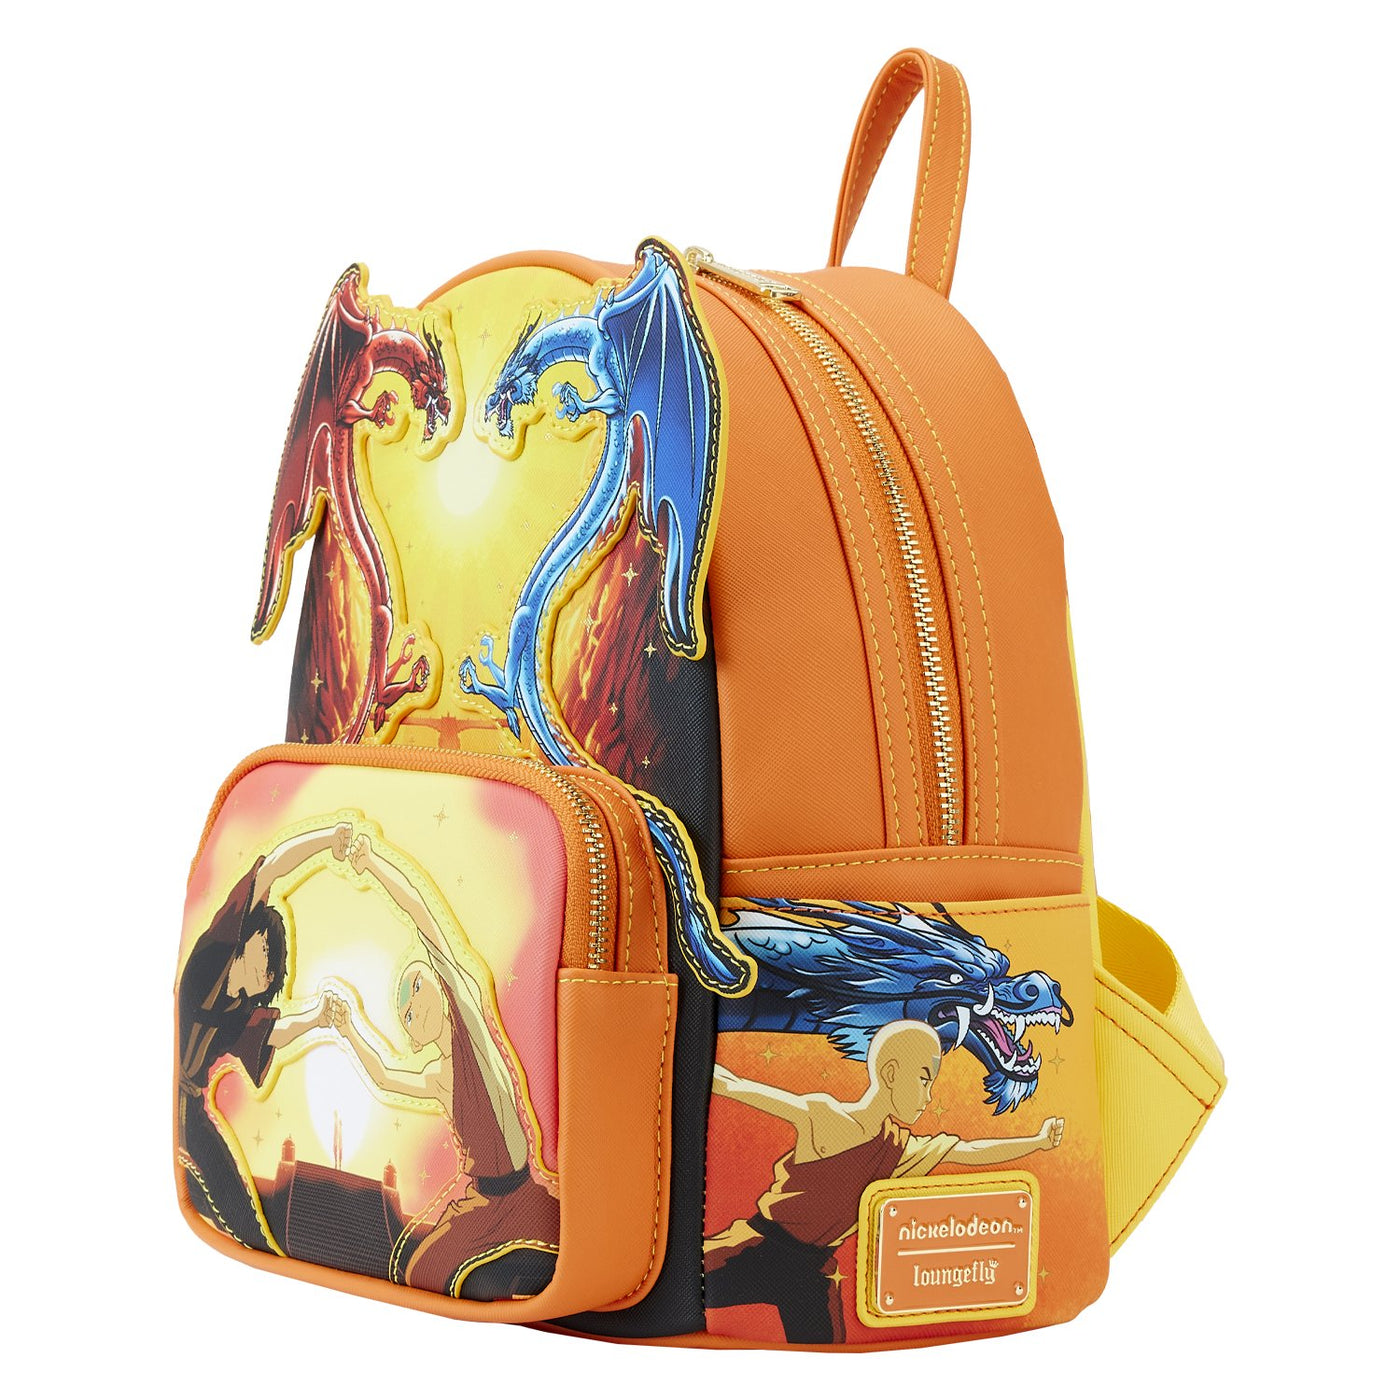 671803395190 - Loungefly Nickelodeon Avatar The Last Airbender The Fire Dance Mini Backpack - Side View